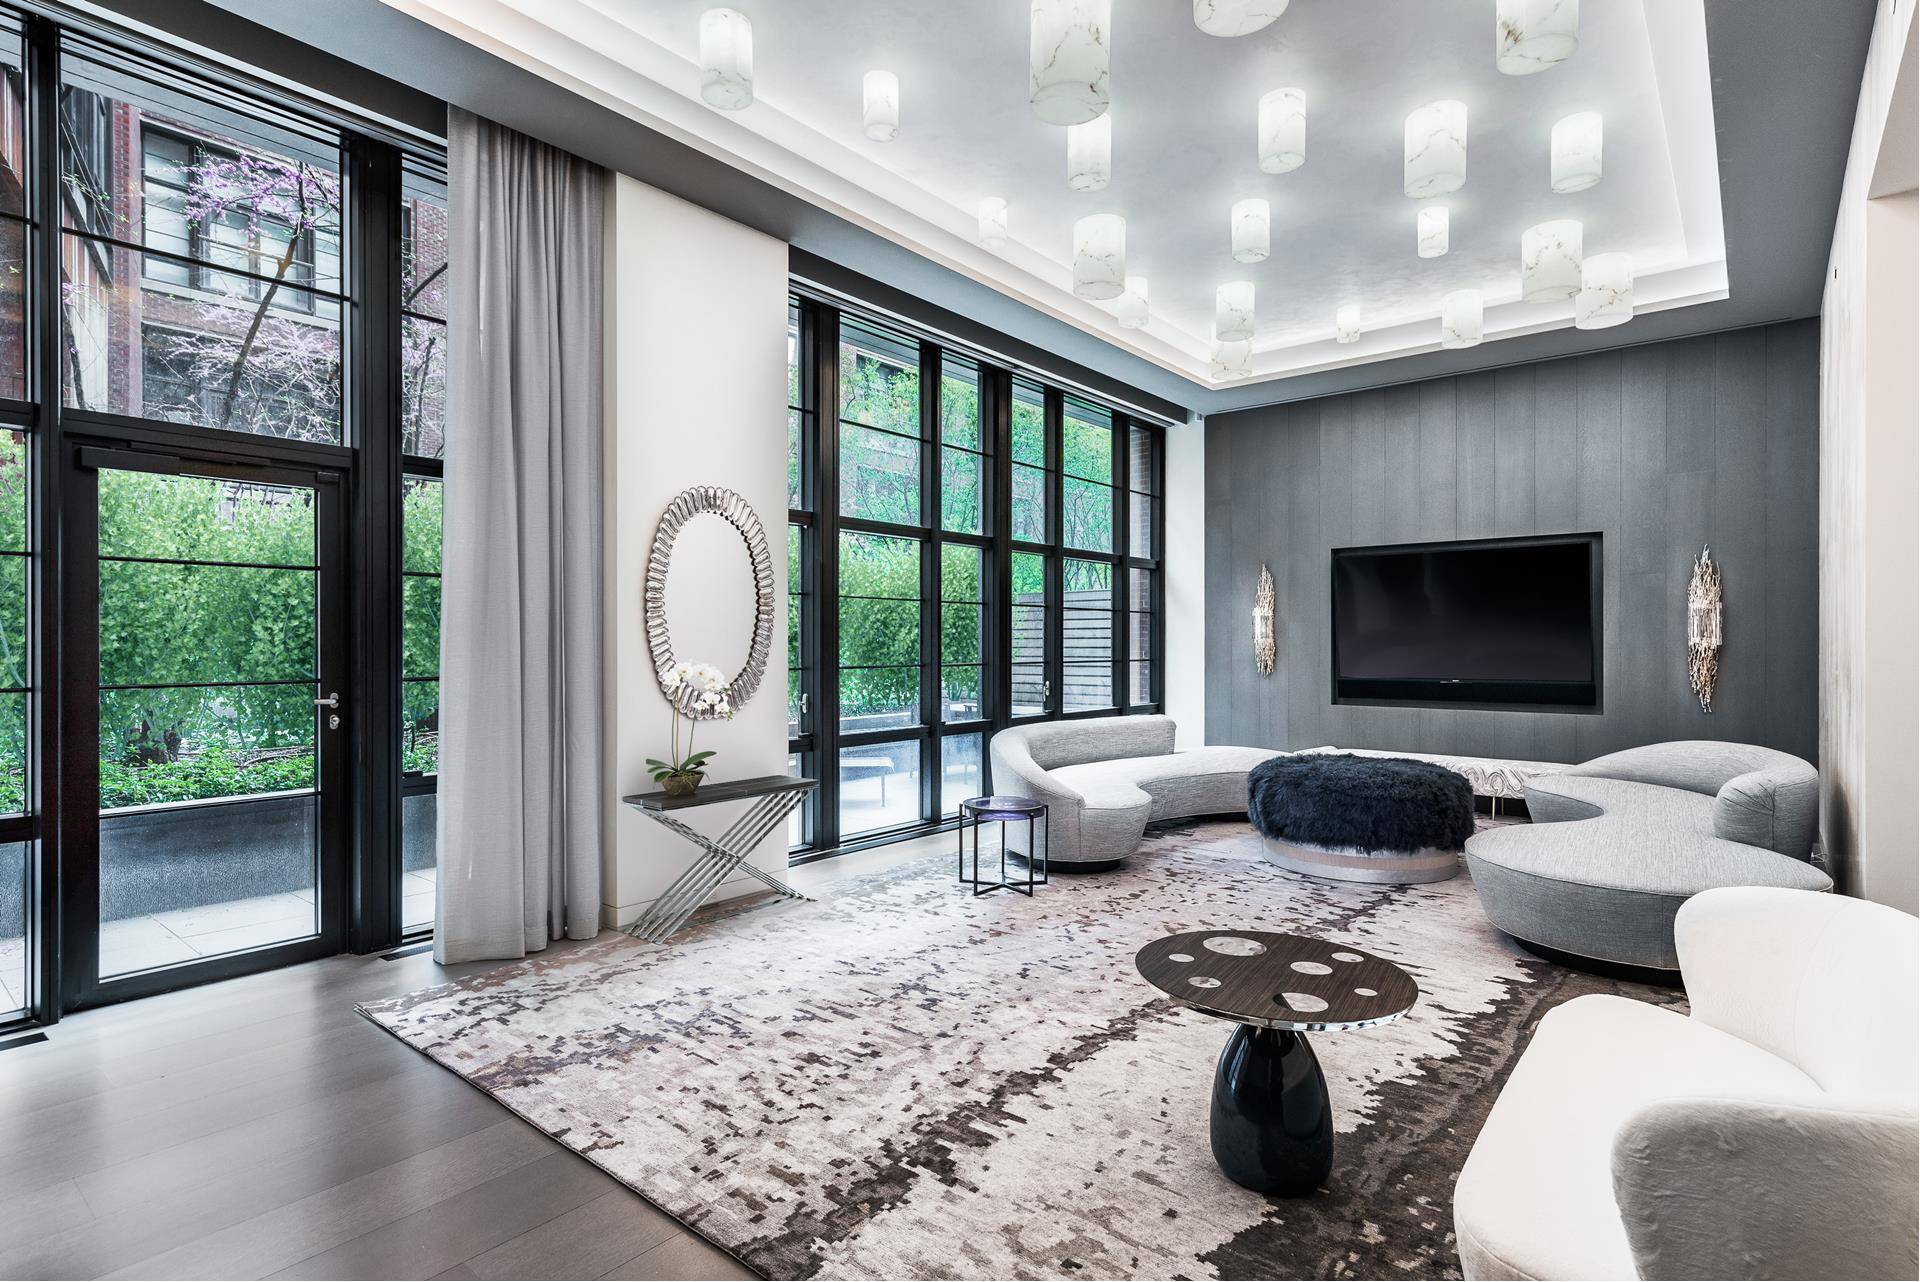 Located at 150 Charles Street, the West Village's most coveted full service condominium, this 45 foot wide townhouse was meticulously renovated by interior designer Daun Curry, winner of prestigious awards ...